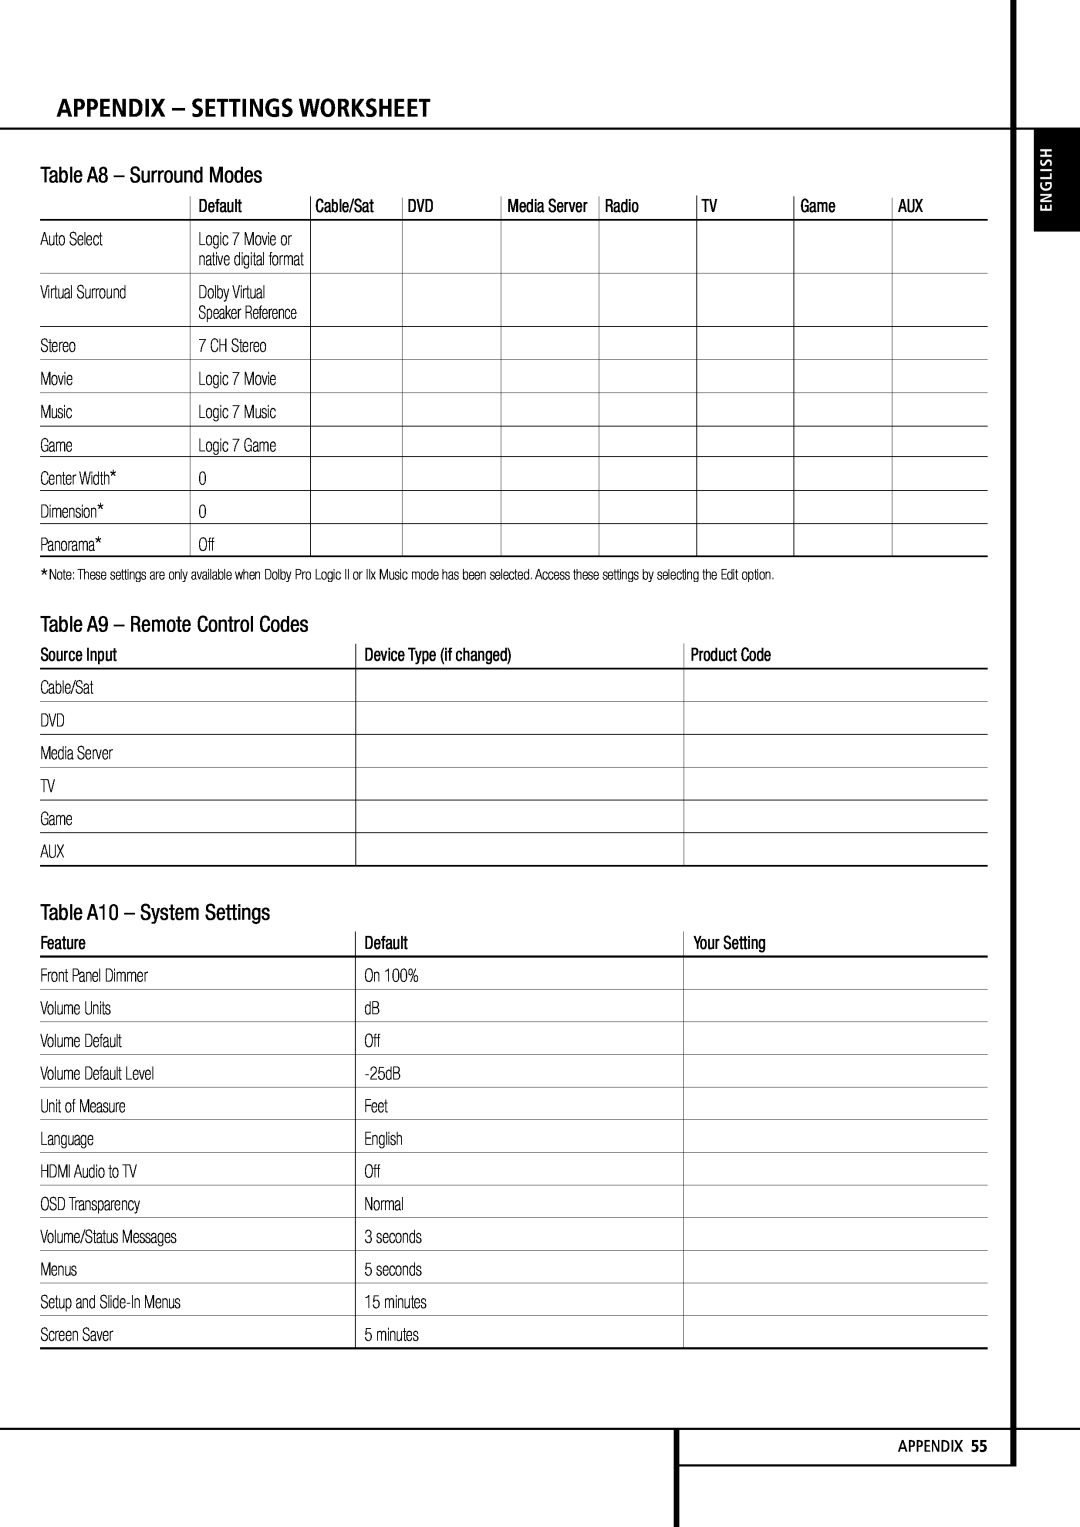 Harman-Kardon AVR 255, AVR 355 Appendix – Settings Worksheet, Table A8 – Surround Modes, Table A9 – Remote Control Codes 